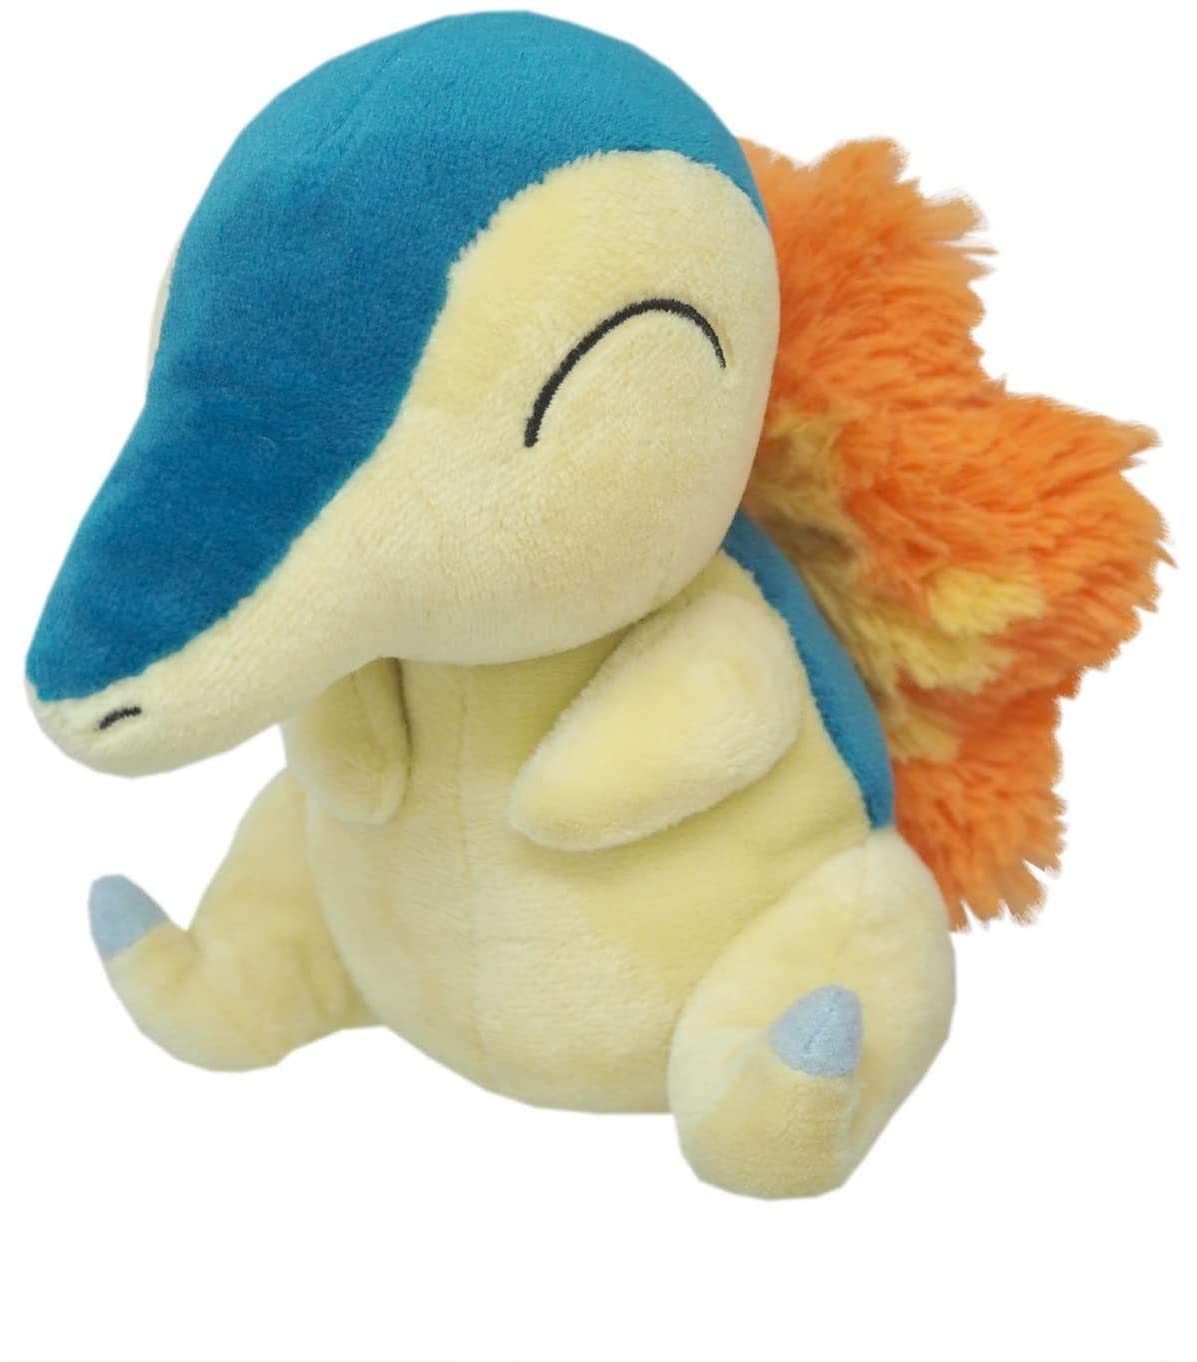 Sanei All Star Collection 6 Inch Plush - Cyndaquil PP041